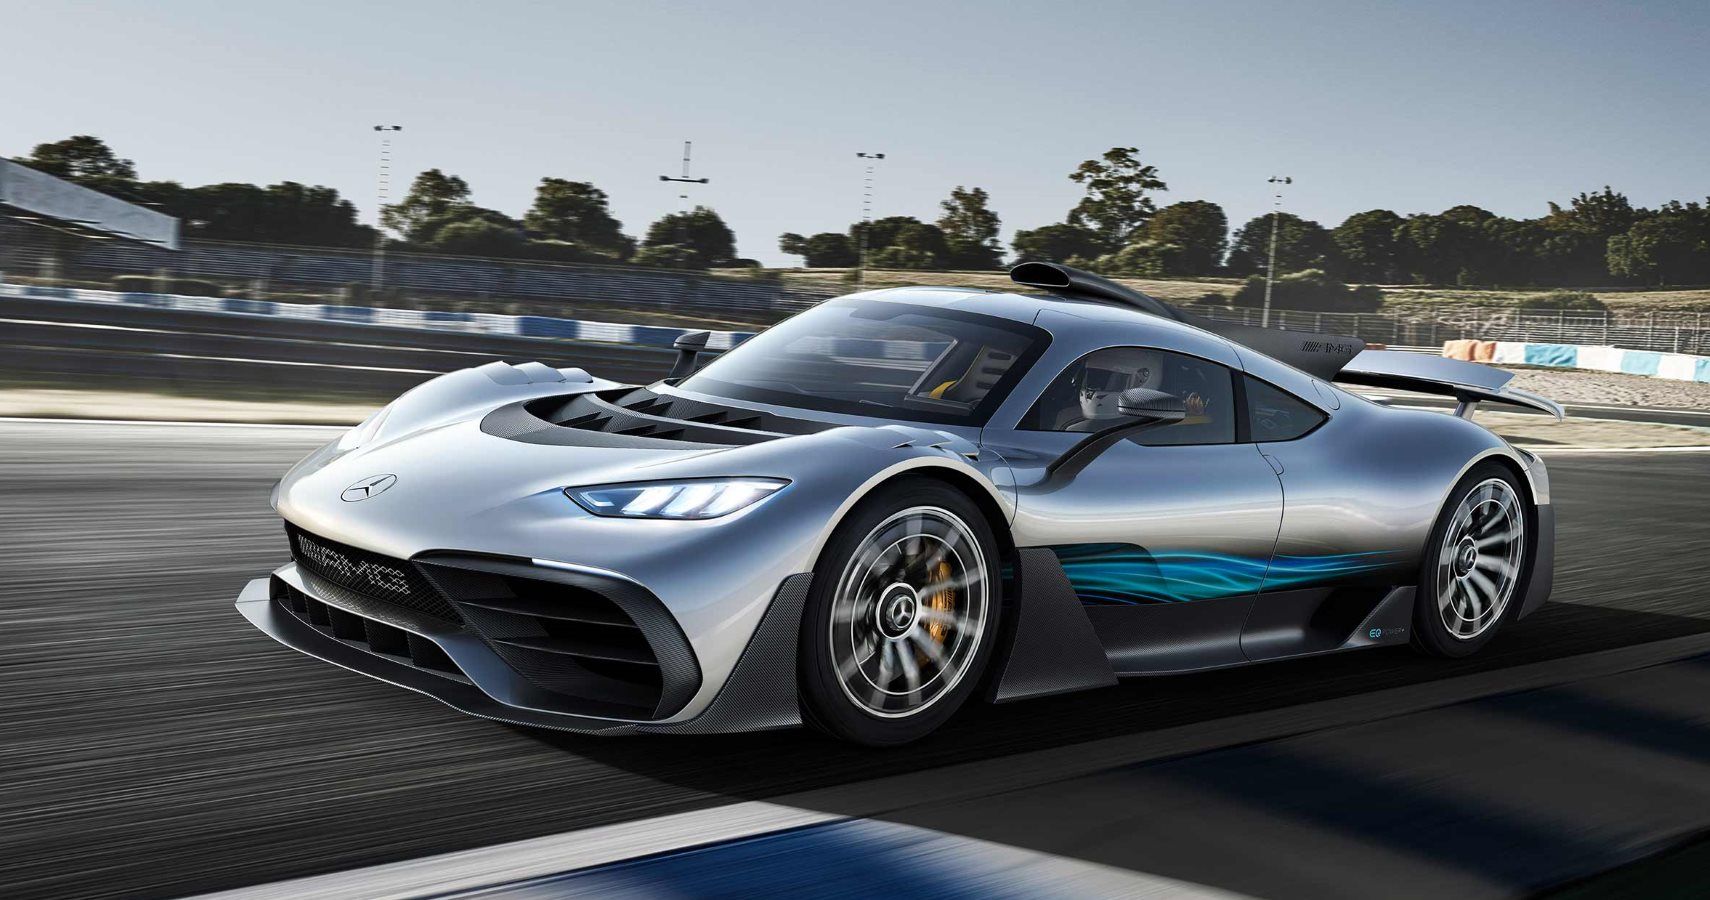 Mercedes-AMG Project One Owners Not Allowed To Sell Cars For Profit